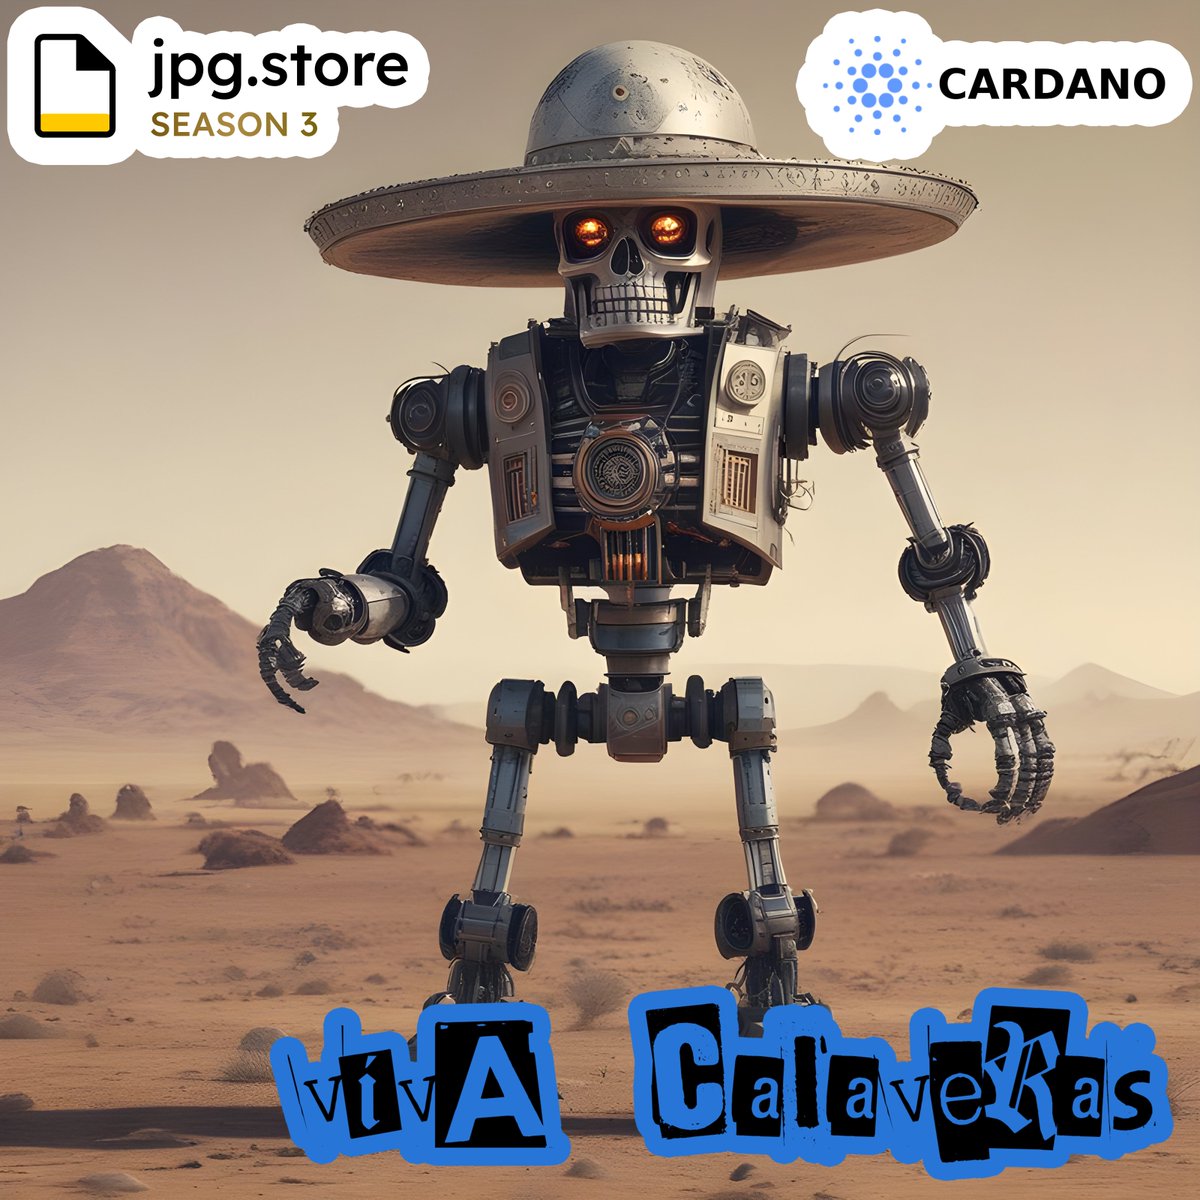 Viva Calaveras on jpg.store! These NFTs can be redeemed for a signed 3D printed K-SCOPES® Trading Card

Mario
jpg.store/listing/226855…

#cardano #ADA #CardanoNFT #CardanoCommunity #NFT #vivacalaveras #calaveras #kscopes #tradingcards #3dprinting #AI